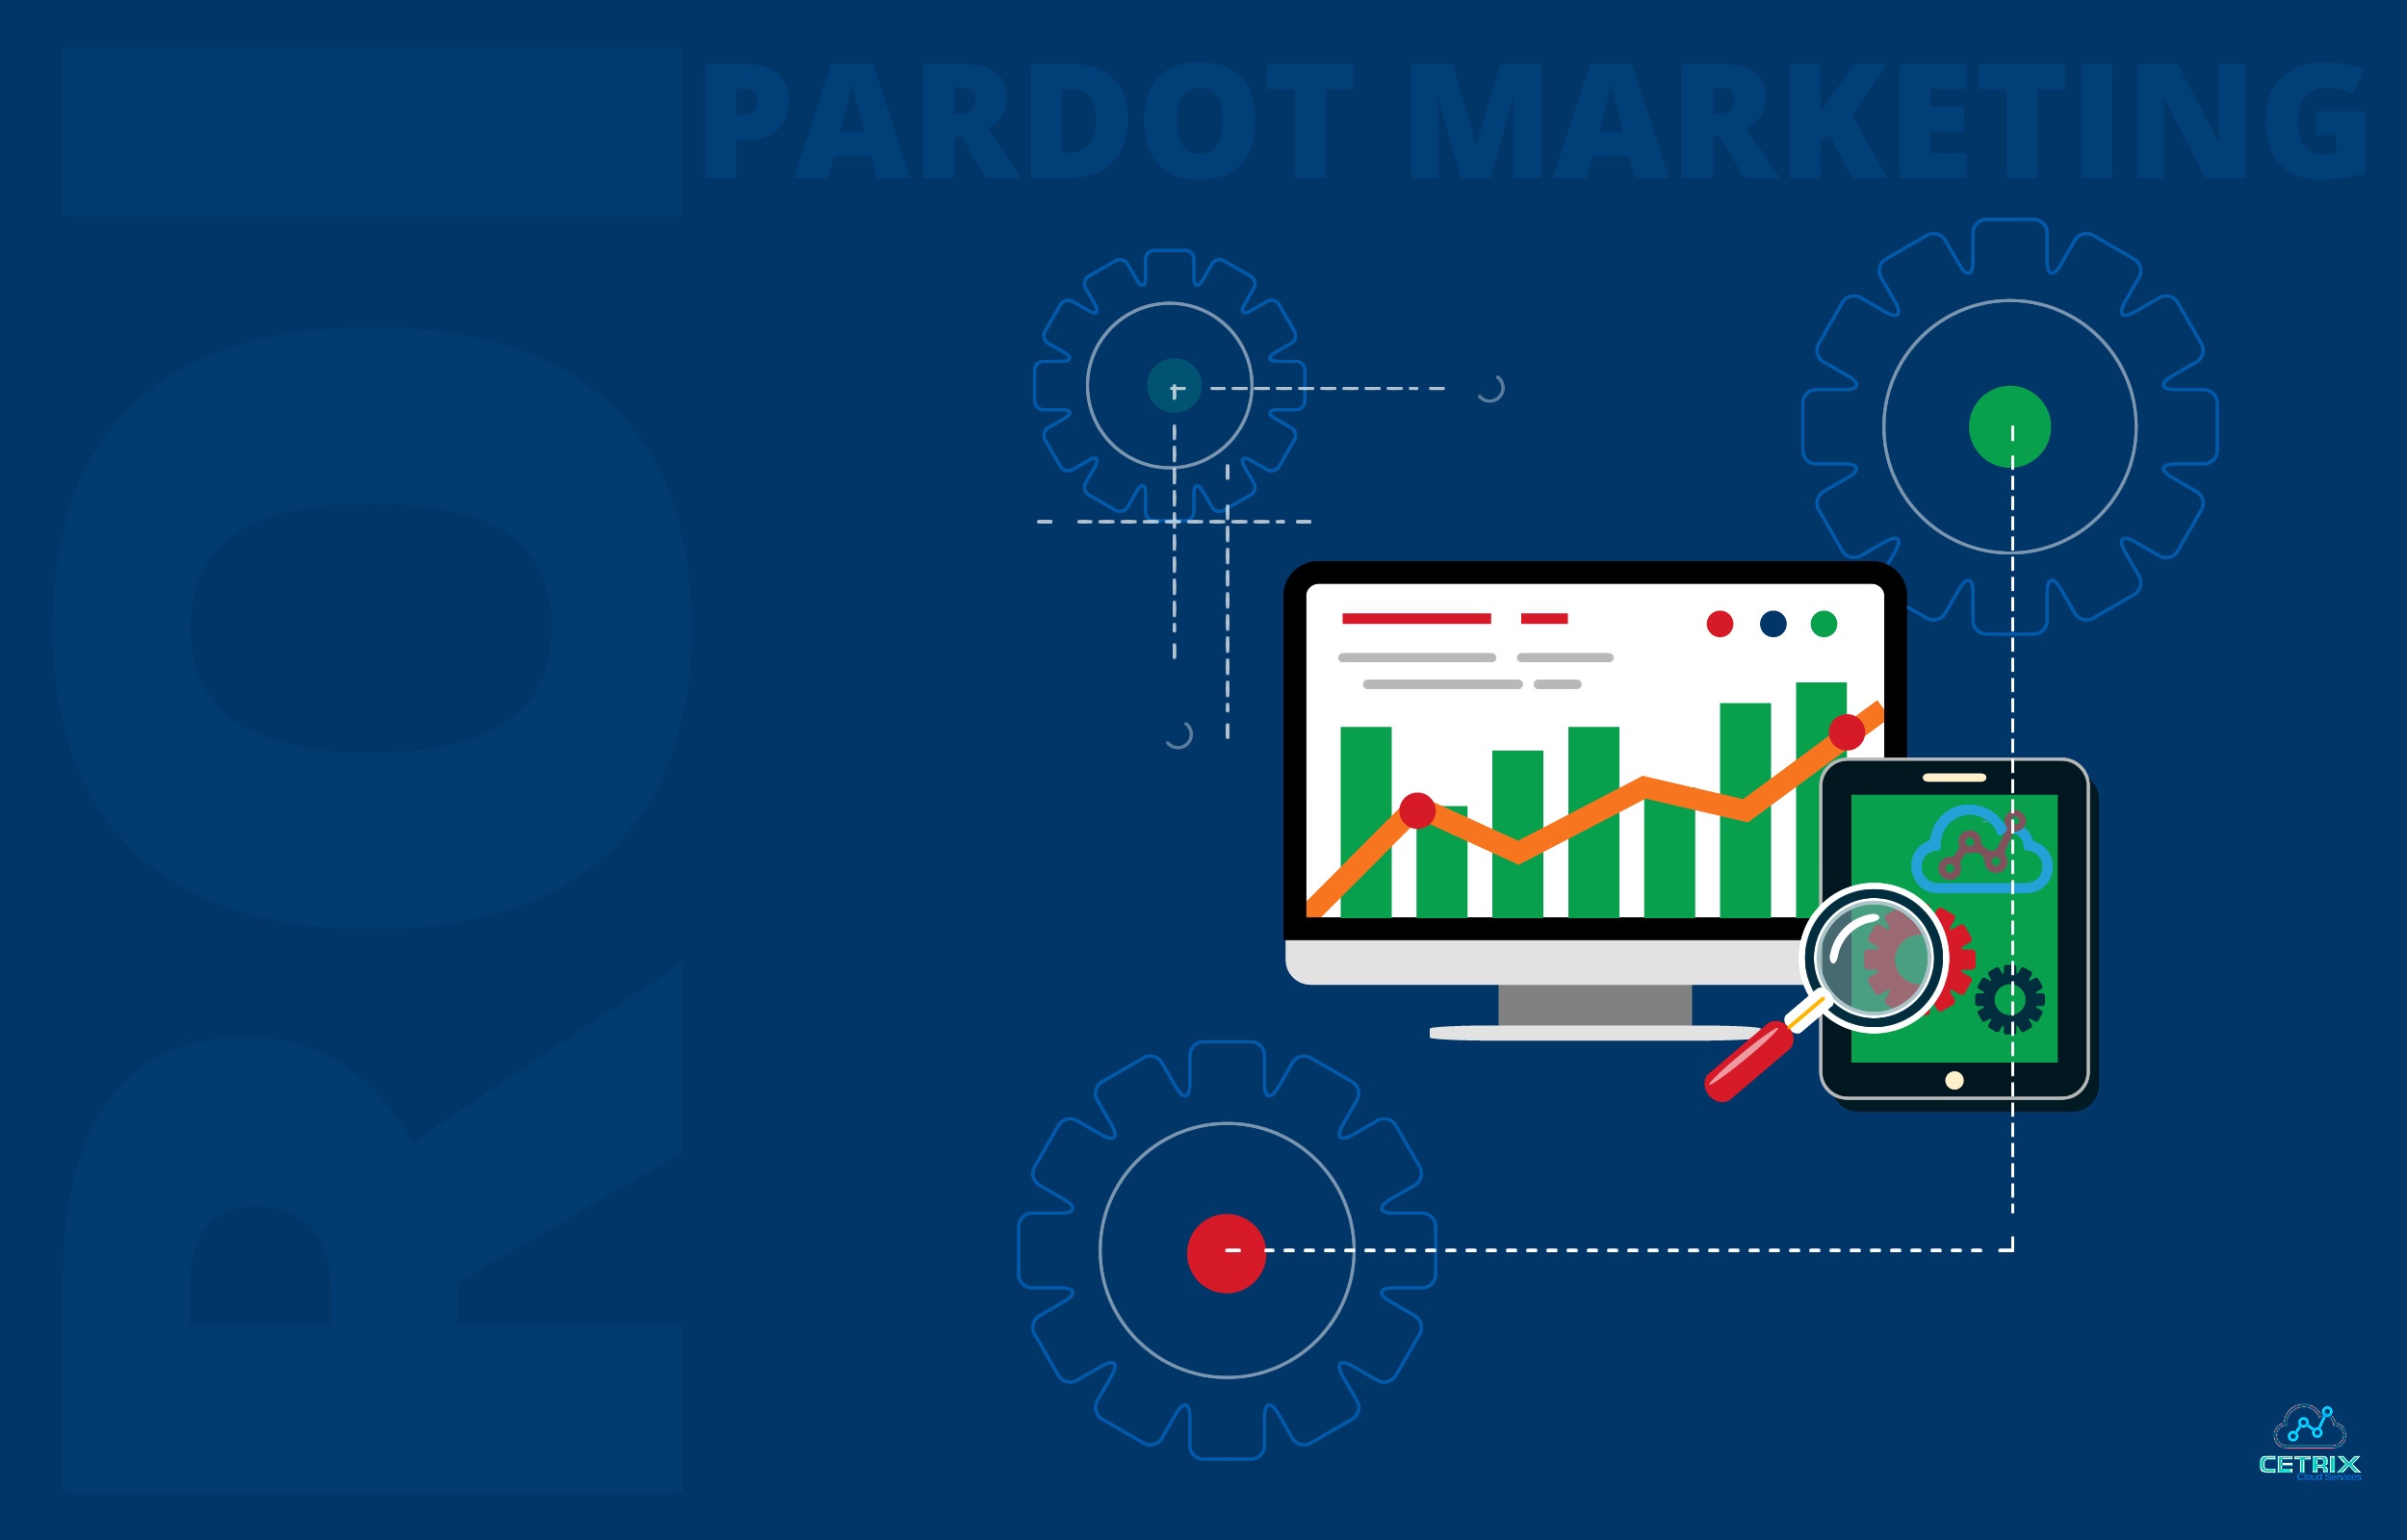 How to Get More ROI from Pardot Marketing Automation?